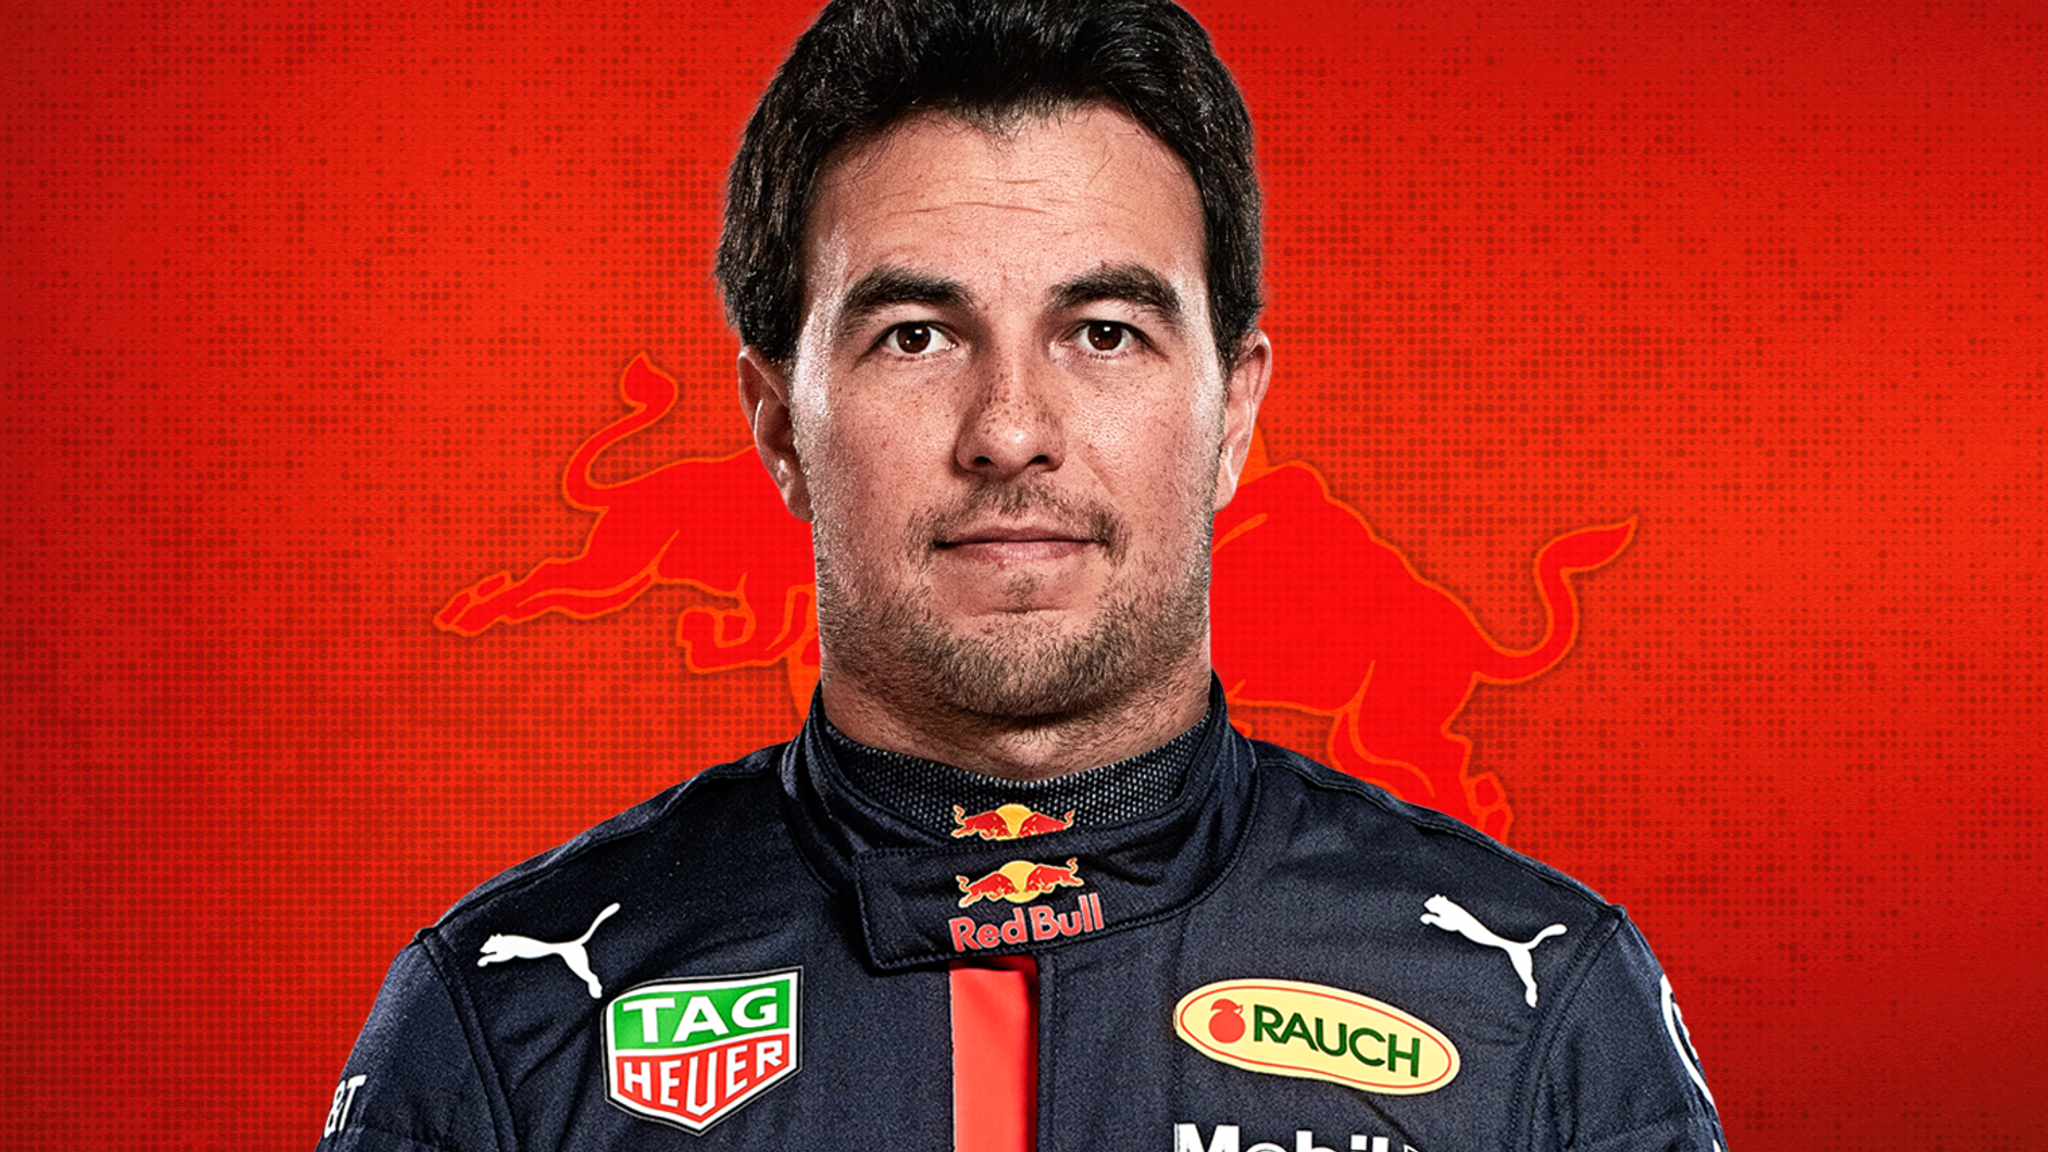 Sergio Perez Signs For Red Bull As Max Verstappen F1 Team Mate For 2021 Season